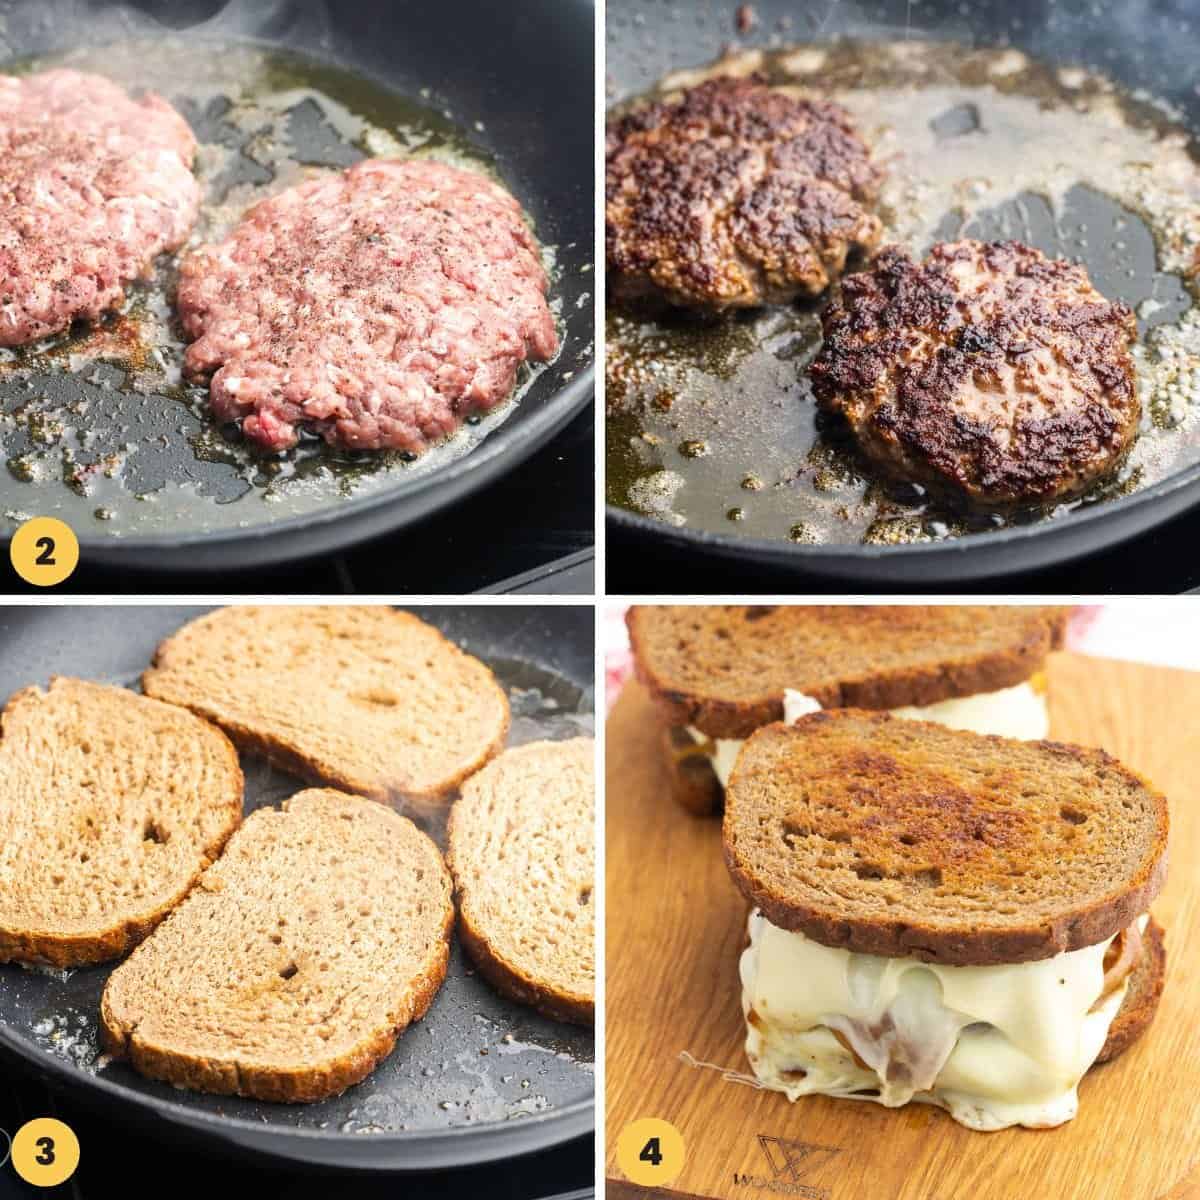 a collage of four images showing how to make burgers into patty melts on rye bread.